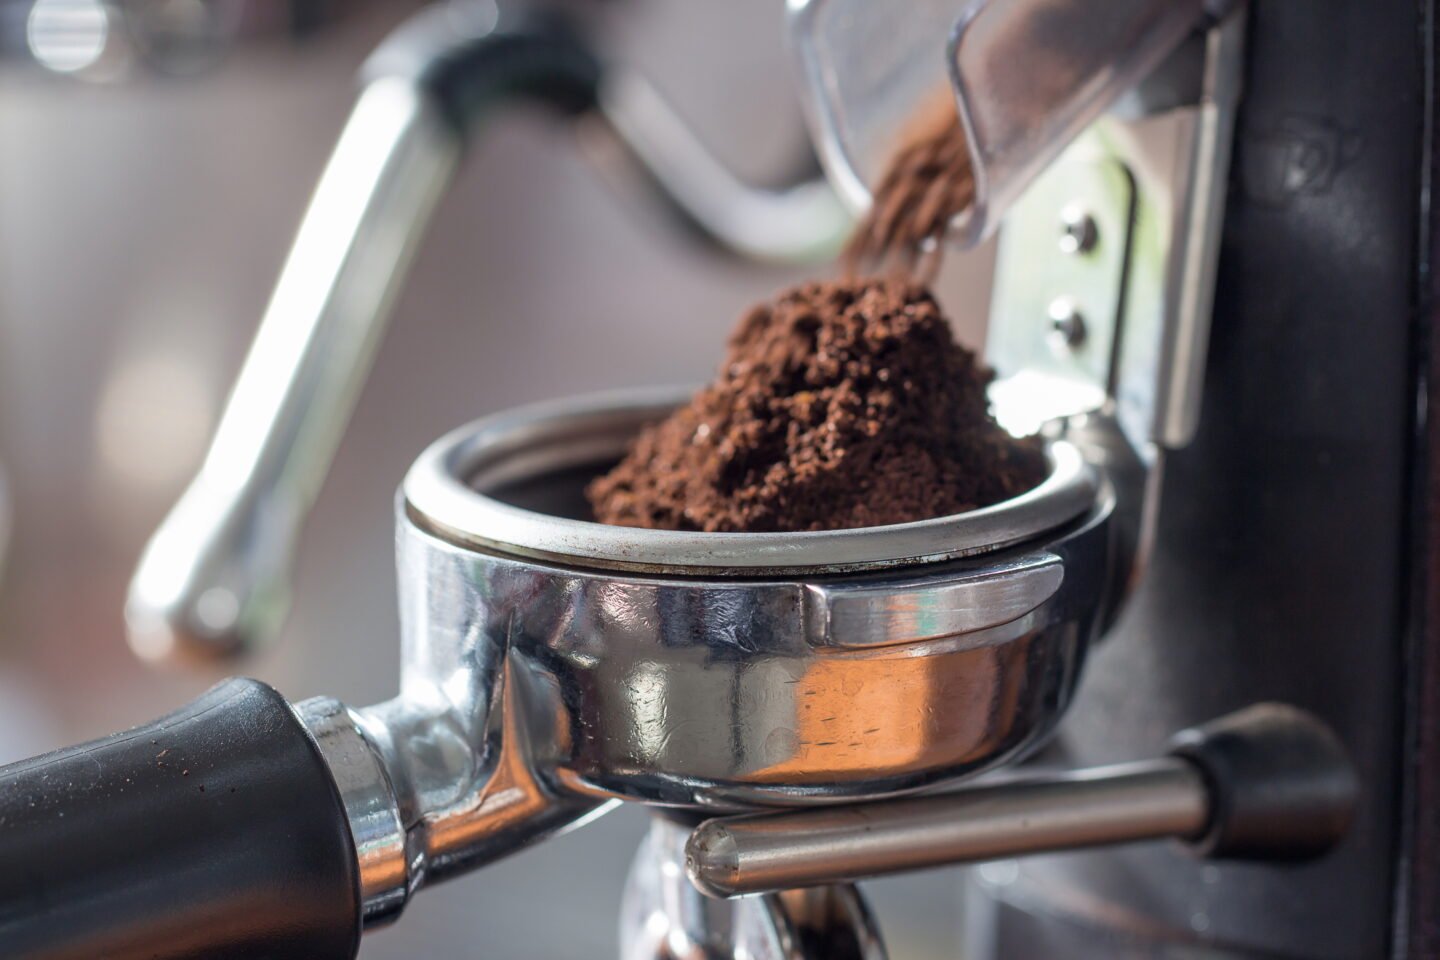 Coffee,Grinder,Grinding,Freshly,Roasted,Make,Beans,Into,A,Powder